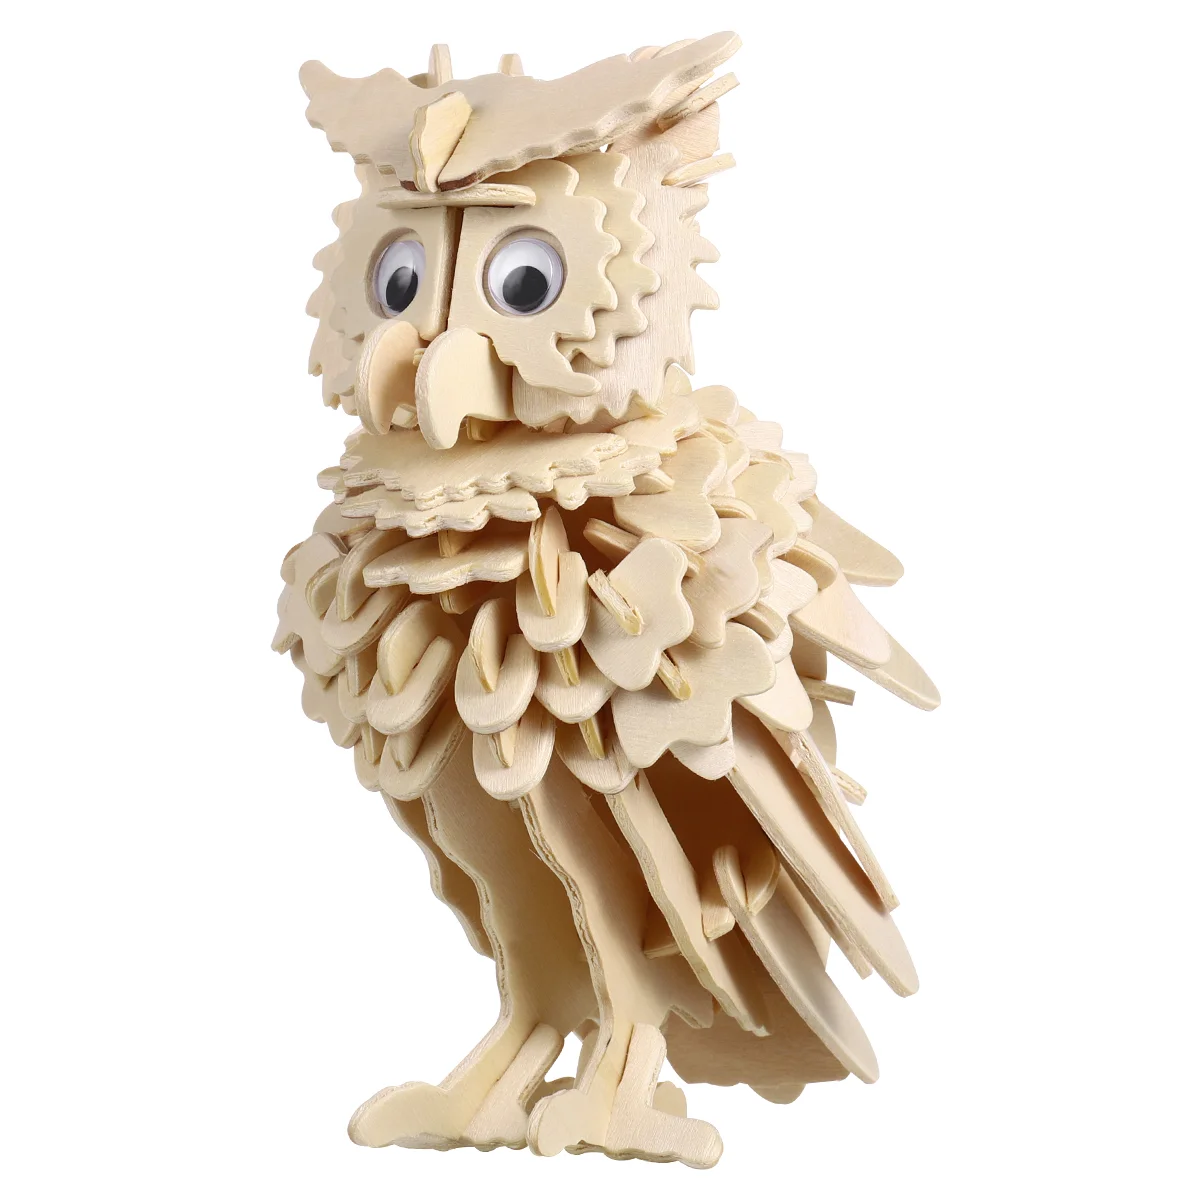 

TOYMYTOY New 3D Wooden Owl Puzzle Jigsaw Woodcraft Kit Toy Model DIY Construction Puzzle Kids Educational Playthings